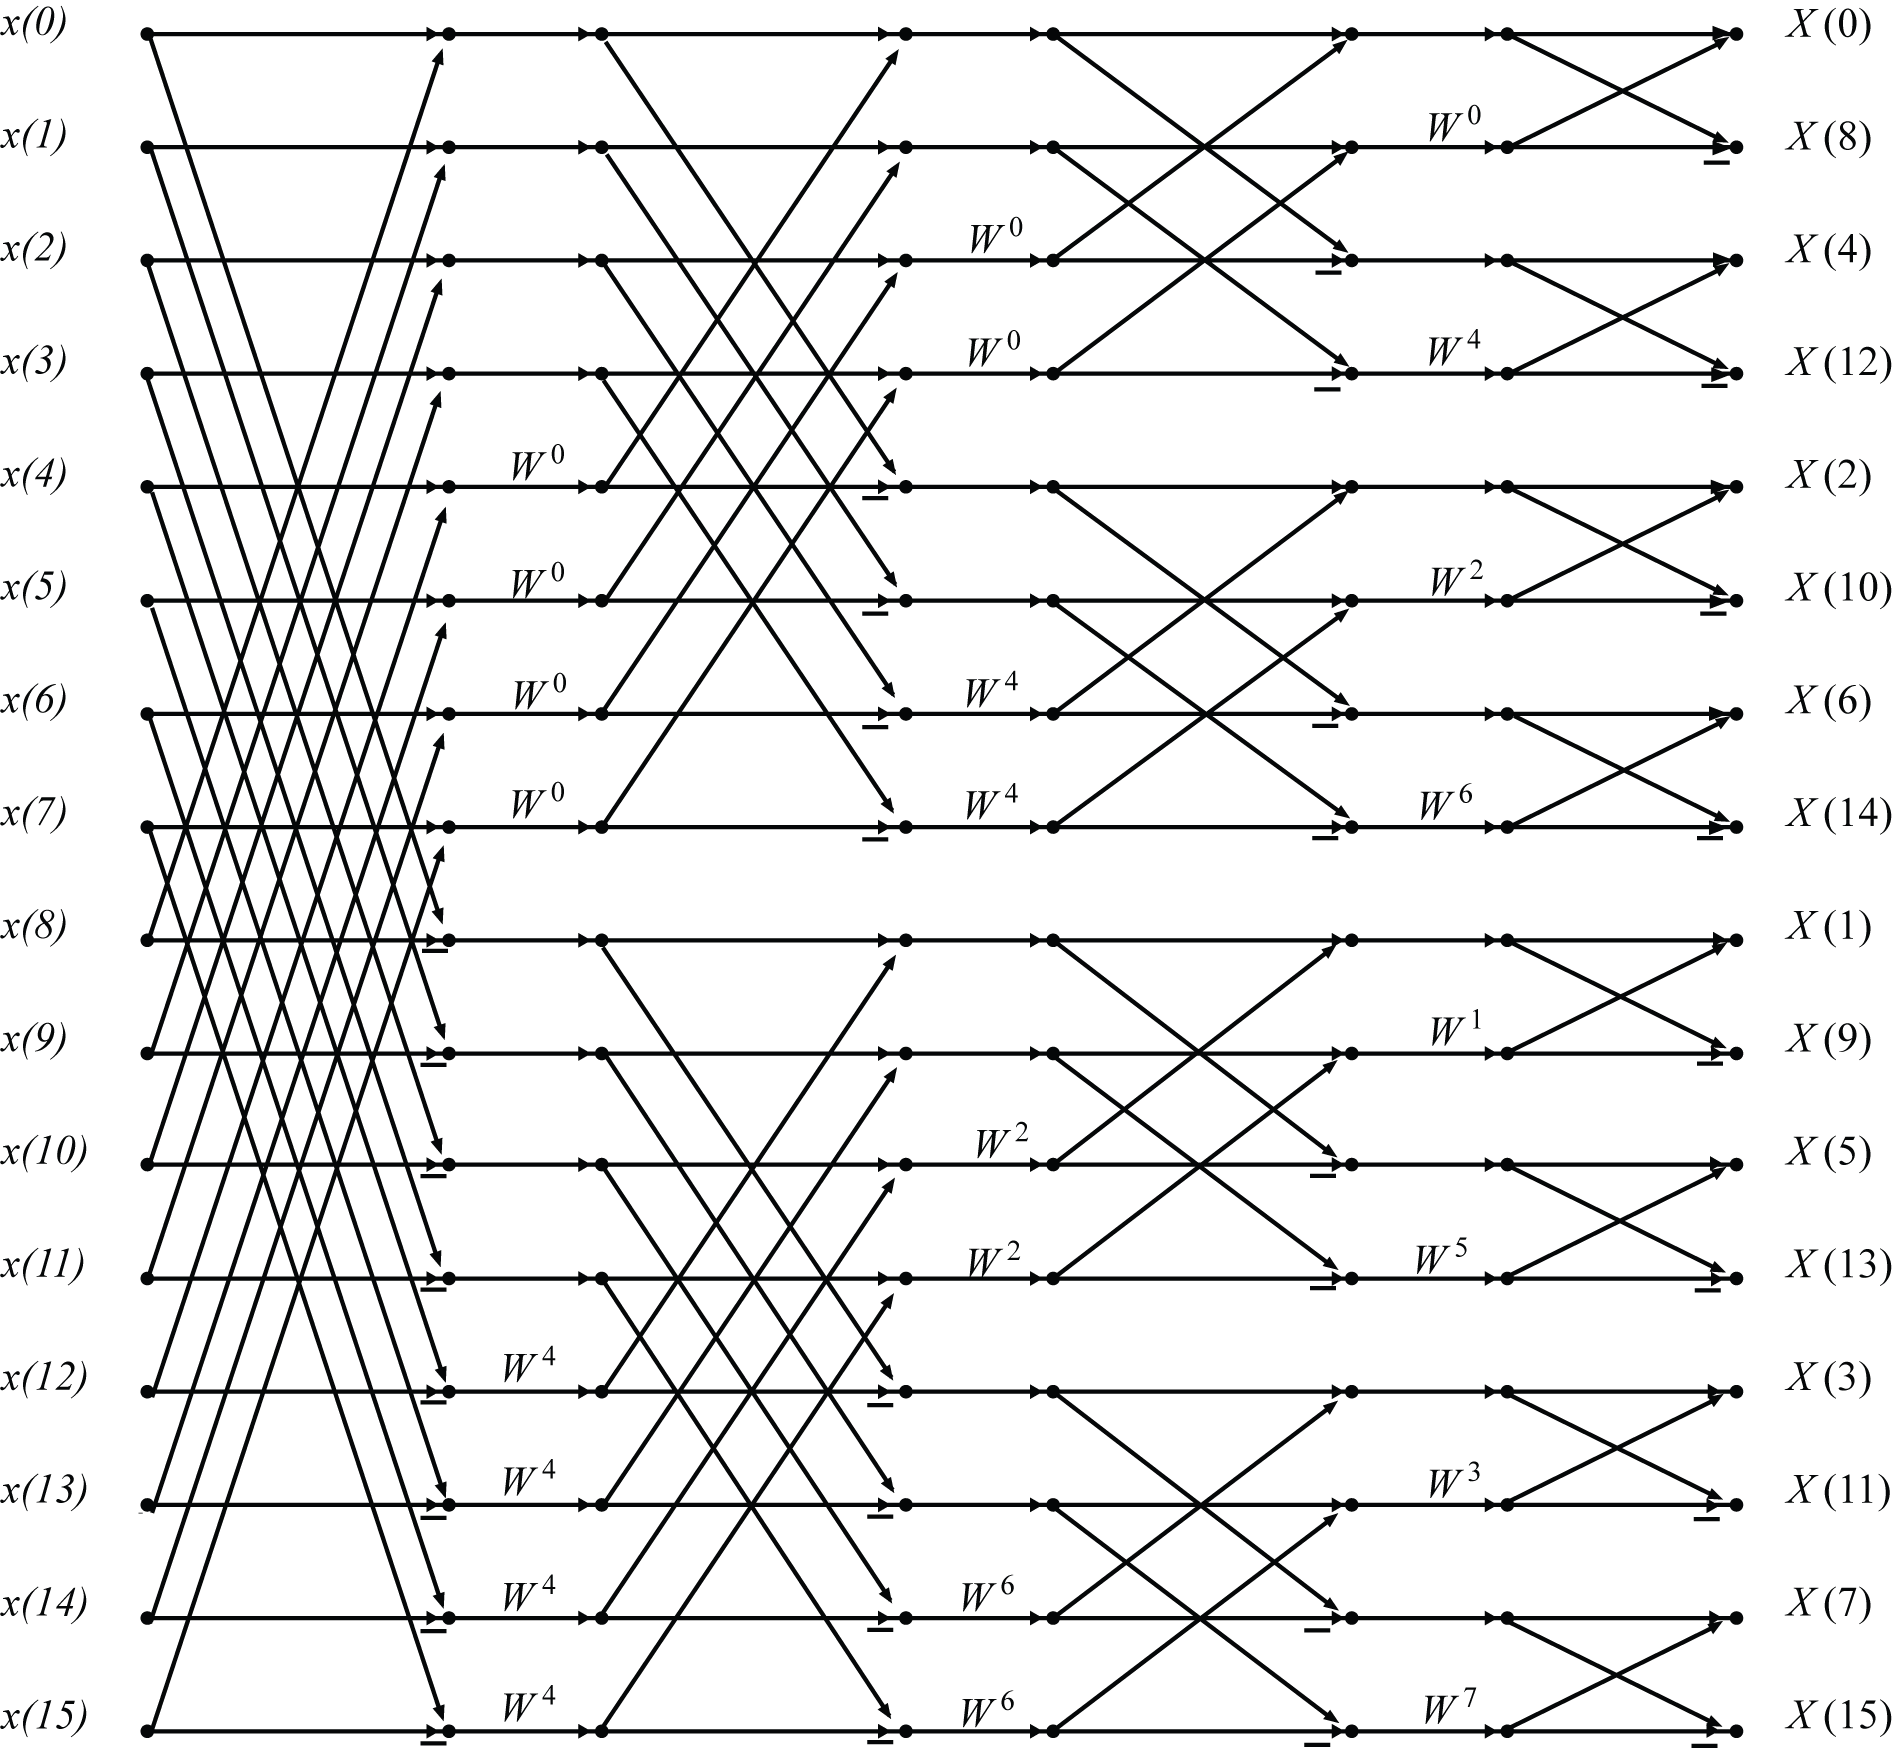 This is a complex figure consisting of sixteen horizontal lines connected by various diagonal lines. The diagonal lines connect to the horizontal lines at eight different points. The lines will be referenced by order from top to bottom, and the points will be referenced by numbered dots from left to right in this description. All of the connected diagonal segments referenced as a group move in the same direction systematically, do not cross paths, and connect only one dot to another. The first dot on lines one through eight are connected to the second dot on lines nine through sixteen, with each line crossing and moving down eight spaces. Conversely, the first dot on lines nine through sixteen connect to the second dot on lines one through eighteen. In the upper half of the next section, the third dots on lines one through four connect to the fourth dots on lines five through eight. Conversely, the third dots on lines five through eight connect to the fourth dots on lines one through four. In the lower half of the next section, the third dots on lines nine through twelve connect to the fourth dots on lines thirteen through sixteen. The third dots on lines thirteen through sixteen also connect with the fourth dots on lines nine through twelve. The next section is visually divided into four parts. In part one, the fifth dots on lines one and two connect to the sixth dots on lines three and four, and the fifth dots on lines three and four connect to the sixth dots on lines one and two. In part two, the fifth dots on lines five and six connect to the sixth dots on lines seven and eight, and the fifth dots on lines seven and eight connect to the sixth dots on lines five and six. In part three, the fifth dots on lines nine and ten connect to the sixth dots on lines eleven and twelve, and the fifth dots on lines eleven and twelve connect to the sixth dots on lines nine and ten. In part four, the fifth dots on lines thirteen and fourteen connect to the sixth dots on lines fifteen and sixteen, and the fifth dots on lines fifteen and sixteen connect to the sixth dots on lines thirteen and fourteen. In the final section of the figure, the diagonal lines are grouped into eight sections that all follow a similar pattern. The seventh dots on even numbered lines connect to the eighth dots on the odd numbered line above them, and the seventh dots on odd numbered lines connect to the eighth dots on the even numbered lines below them. There are various sections of the figure that are labeled with a variable. First, to the left of each horizontal lines and dot number one, the lines are labeled in order from x(0) to x(15) from top to bottom. In between dots two and three on lines five through eight is the label W^0, and in between dots two and three on lines thirteen through sixteen is the label W^4. In between dots four and five on lines three and four is the label W^0. In between dots four and five on lines seven and eight is the label W^4. In between dots four and five on lines eleven and twelve is the label W^2. In between dots four and five on lines fifteen and sixteen is the label W^6. In between dots six and seven on even numbered lines are labeled from top to bottom W^0, W^4, W^2, W^6, W^1, W^5, W^3, W^7. To the right of the horizontal lines and the eighth dots are labels read from top to bottom, X(0), X(8), X(4), X(12), X(2), X(10), X(6), X(14), X(1), X(9), X(5), X(13), X(3), X(11), X(7), and X(15).